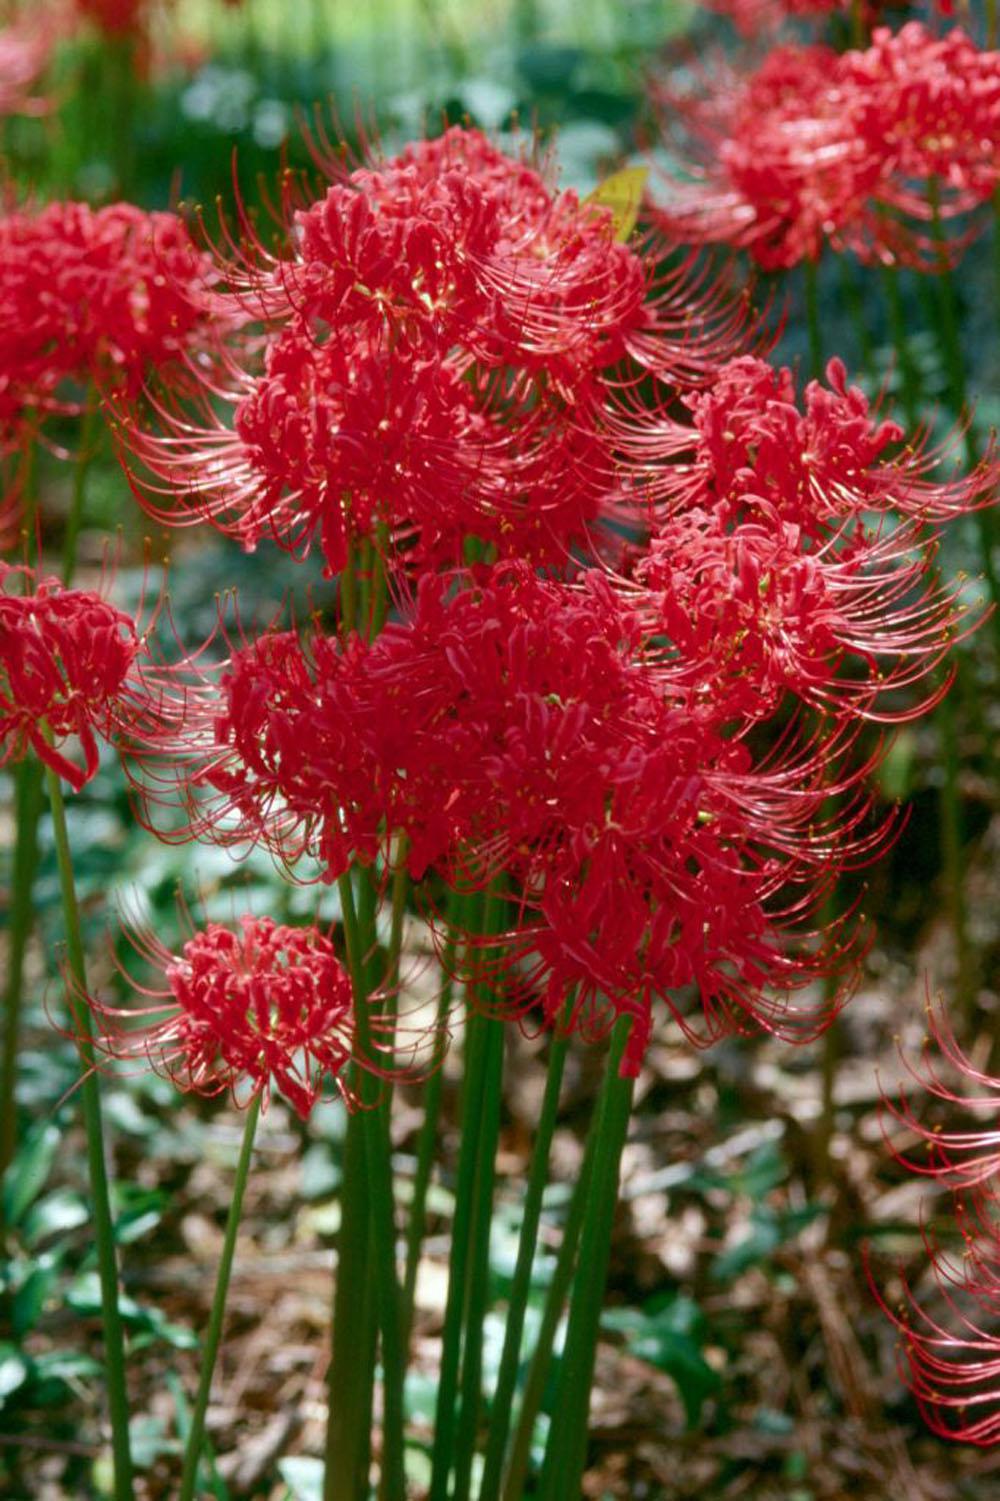 Because the red spider lily doesn't bloom long, it makes a great addition to beds with a groundcover like ivy: the flowers will emerge above the groundcover but will not be missed when they retreat back to the ground.